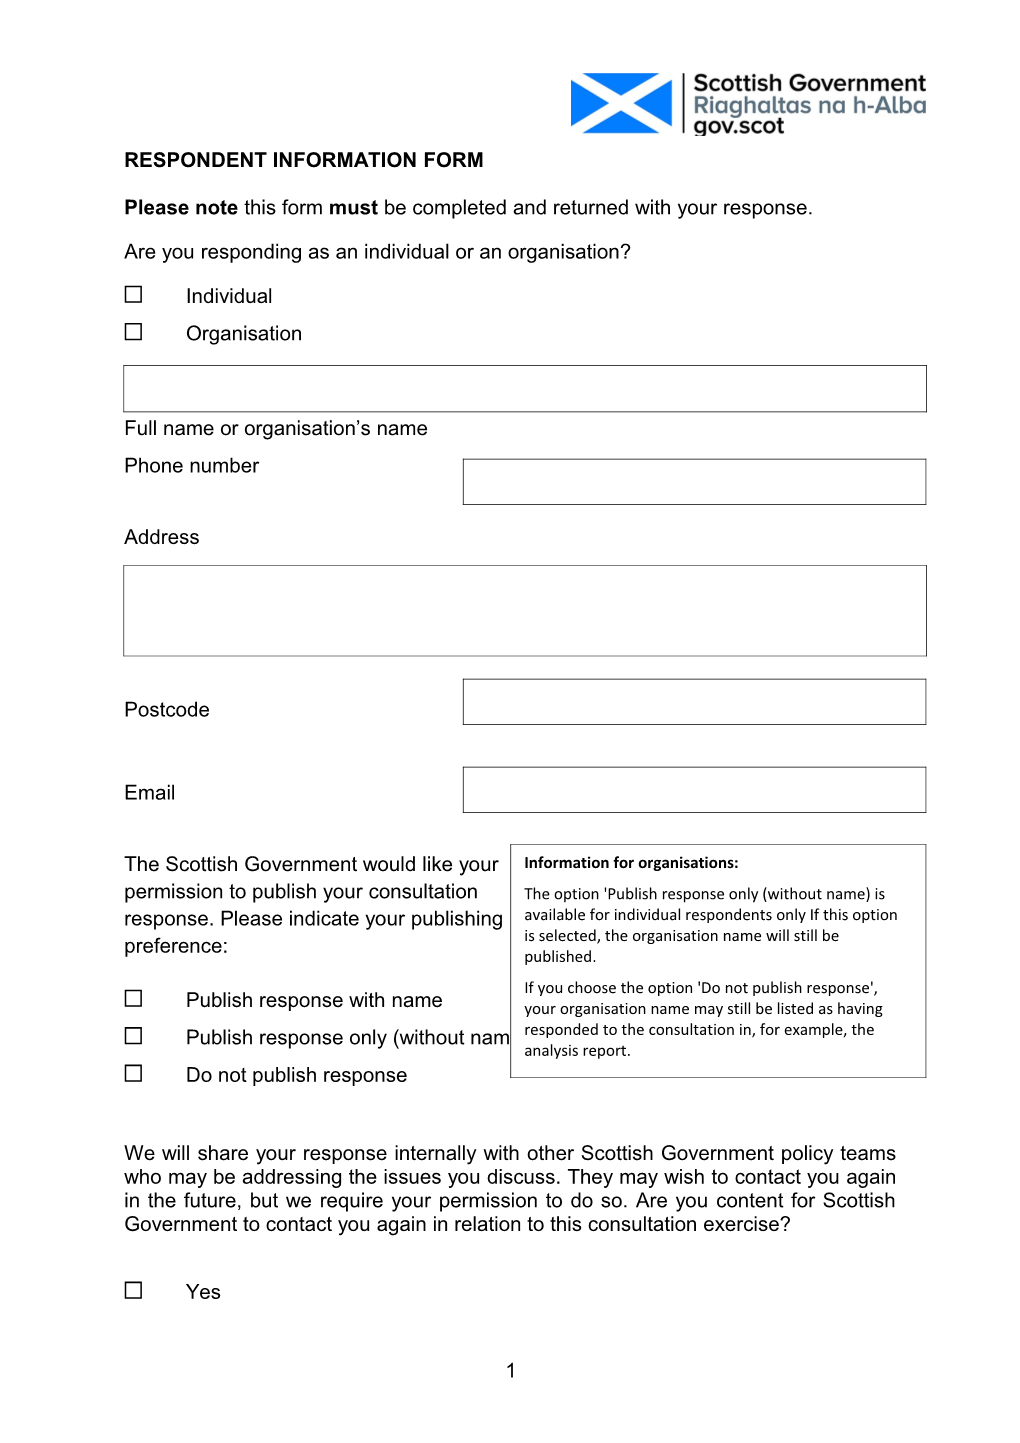 Please Note This Form Must Be Completed and Returned with Your Response